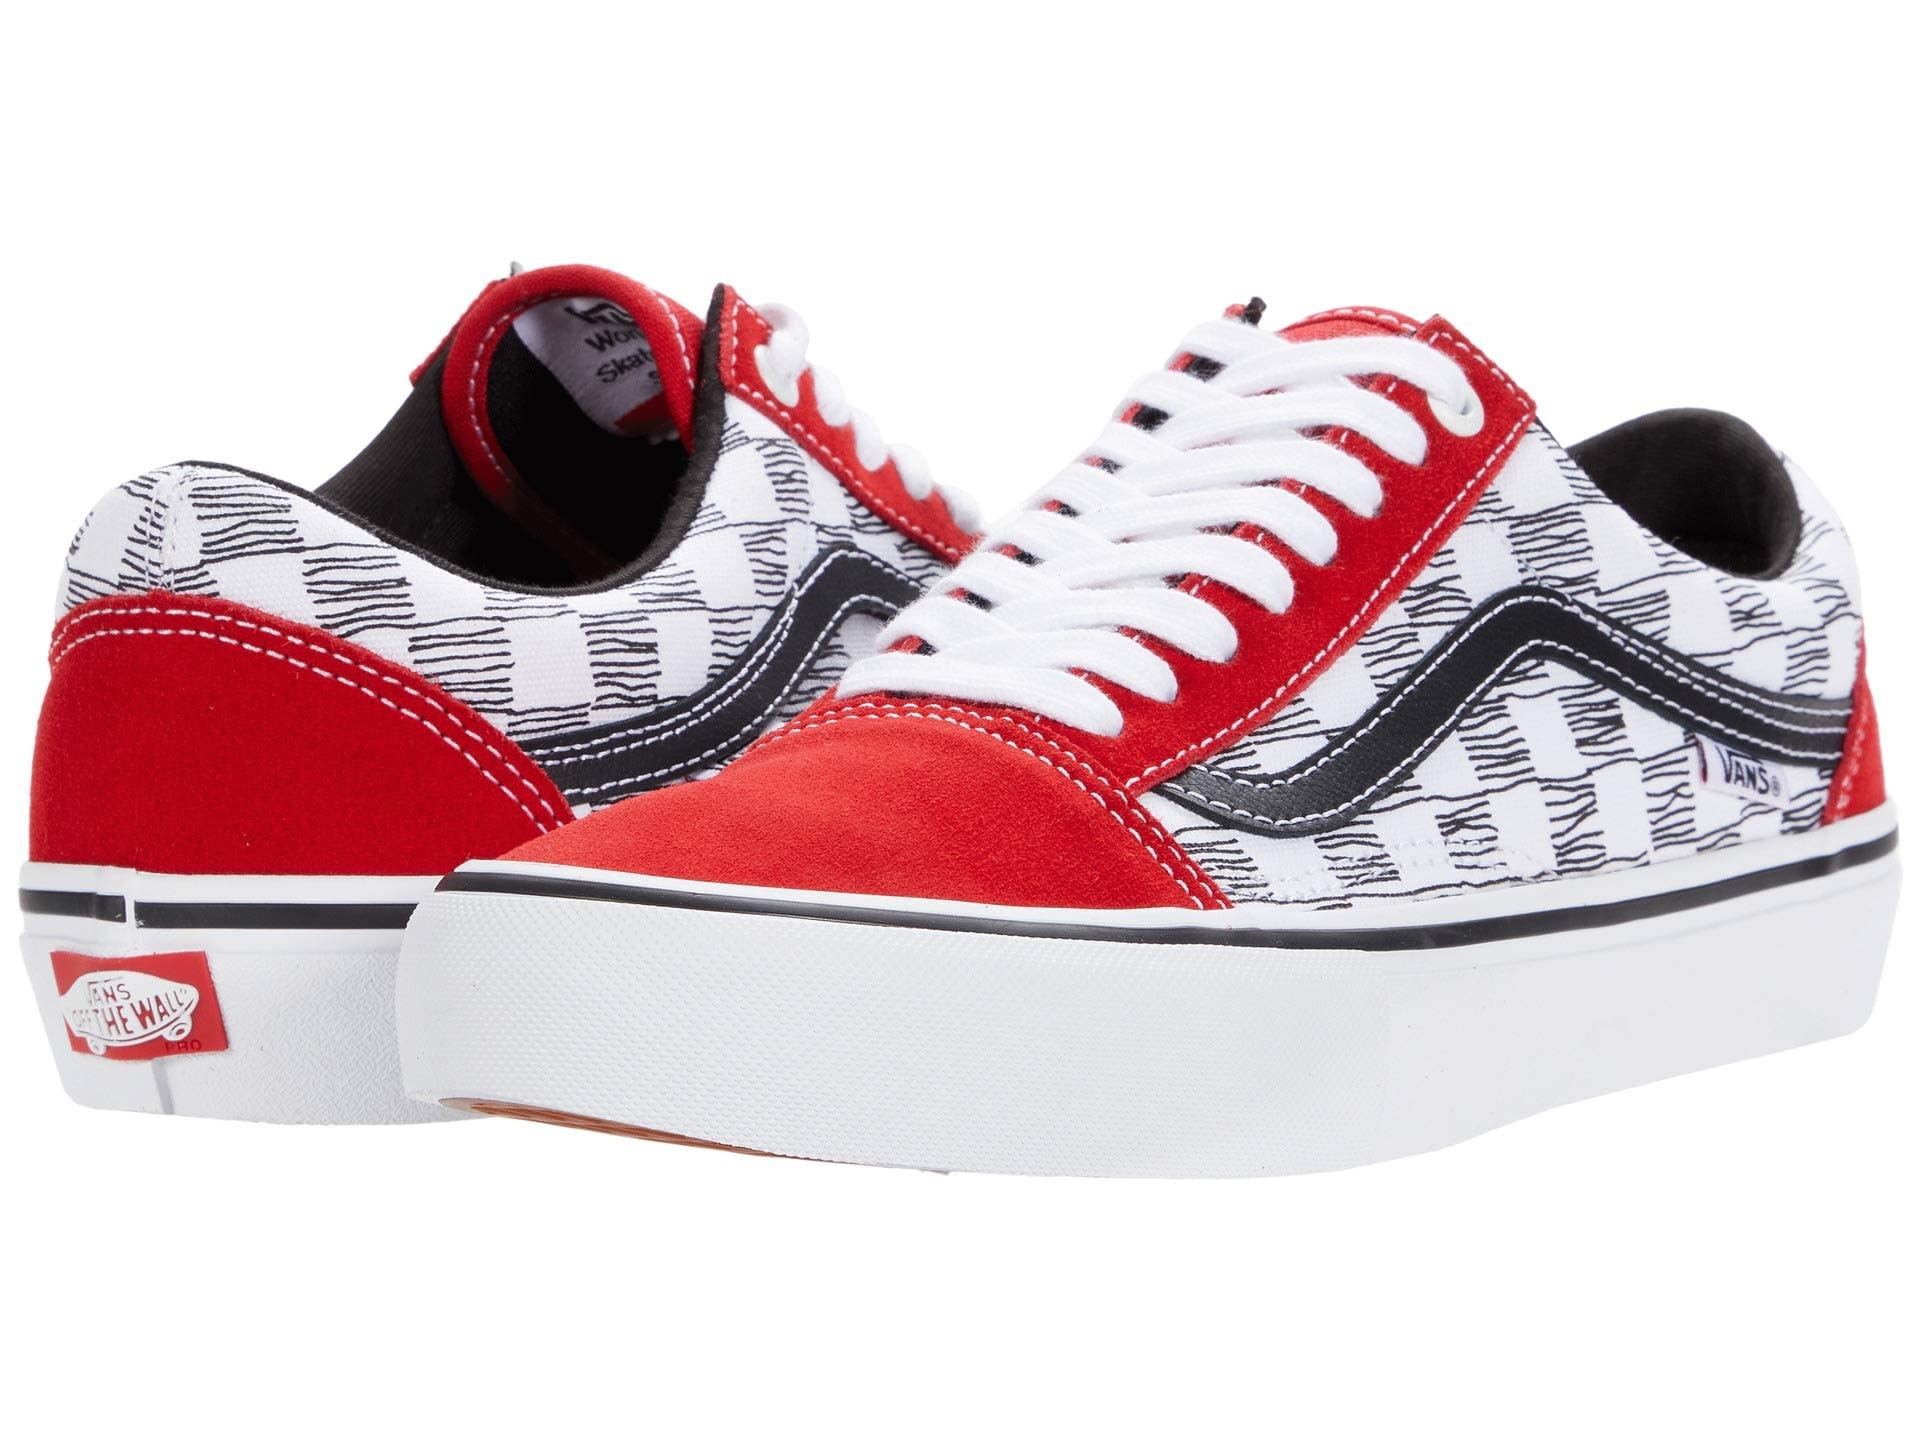 red vans with checkers